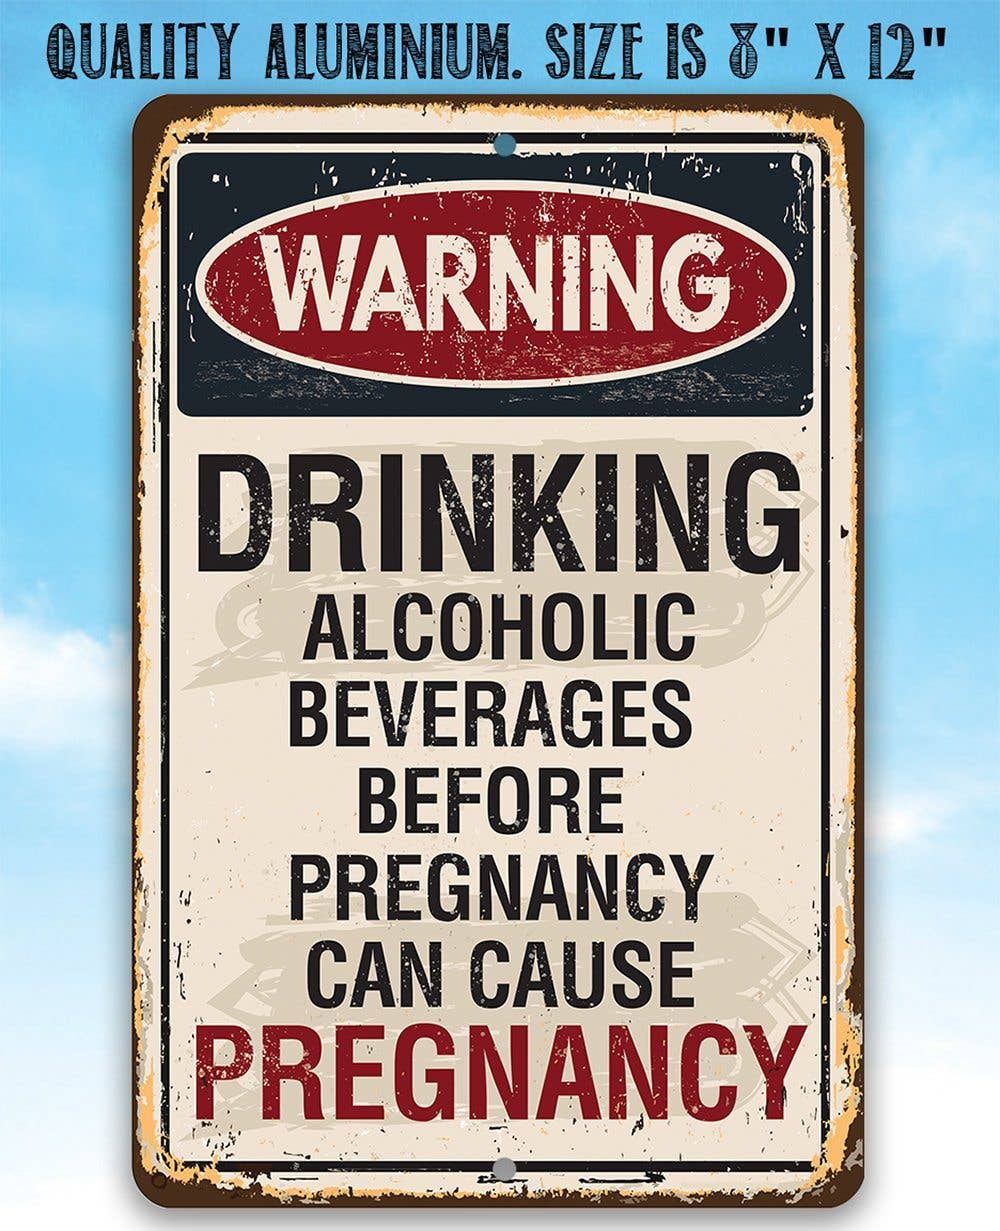 Alcoholic Beverages Can Cause Pregnancy - Metal Sign: 8 x 12